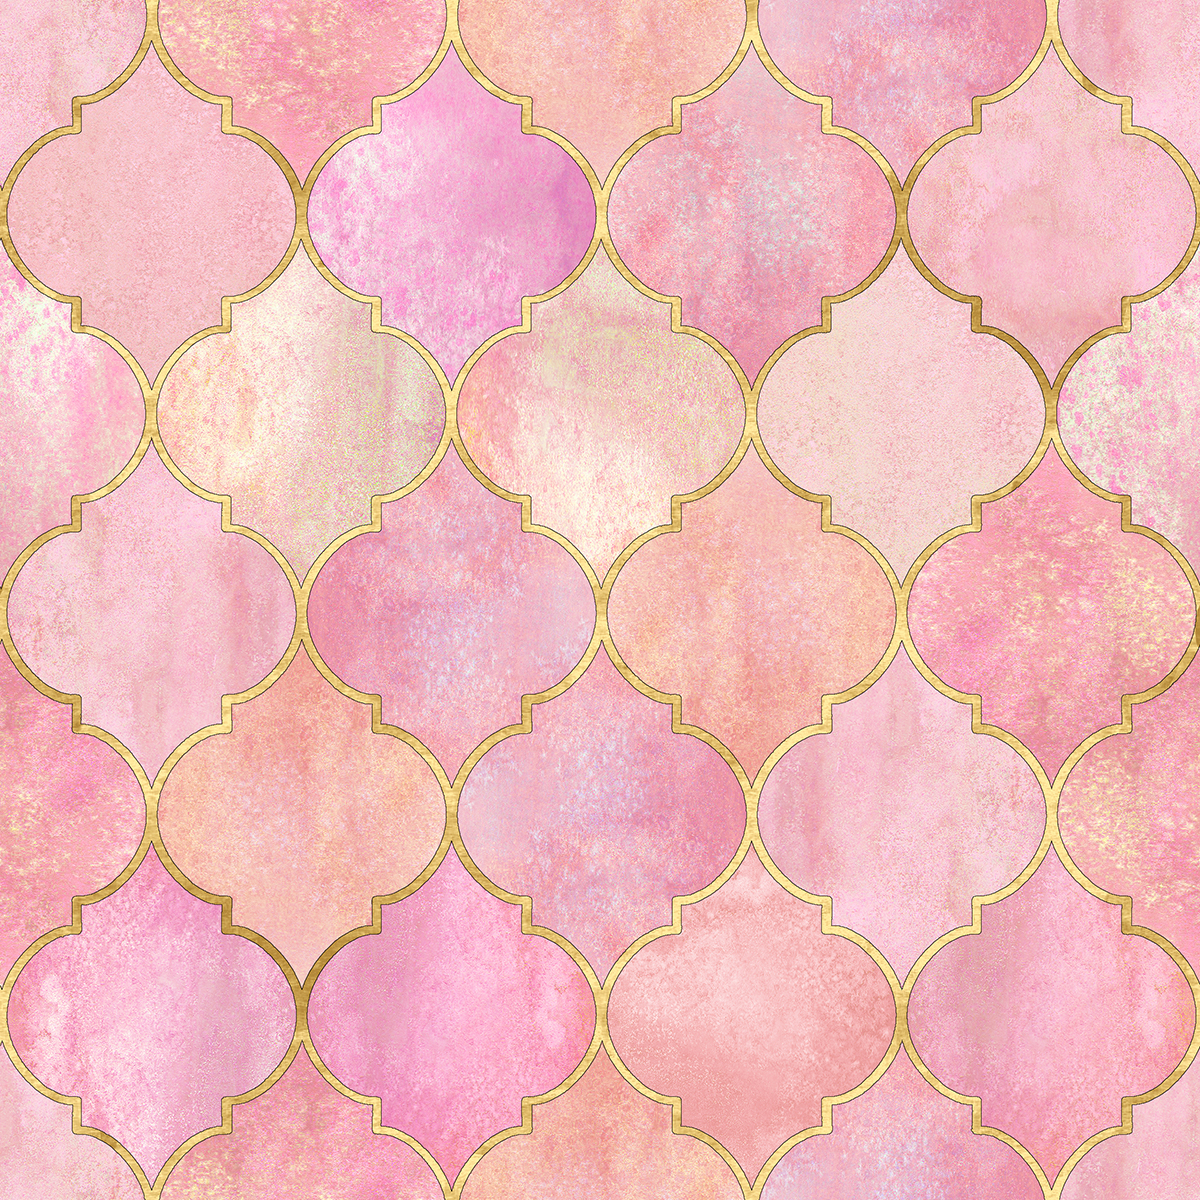 A pink and gold pattern